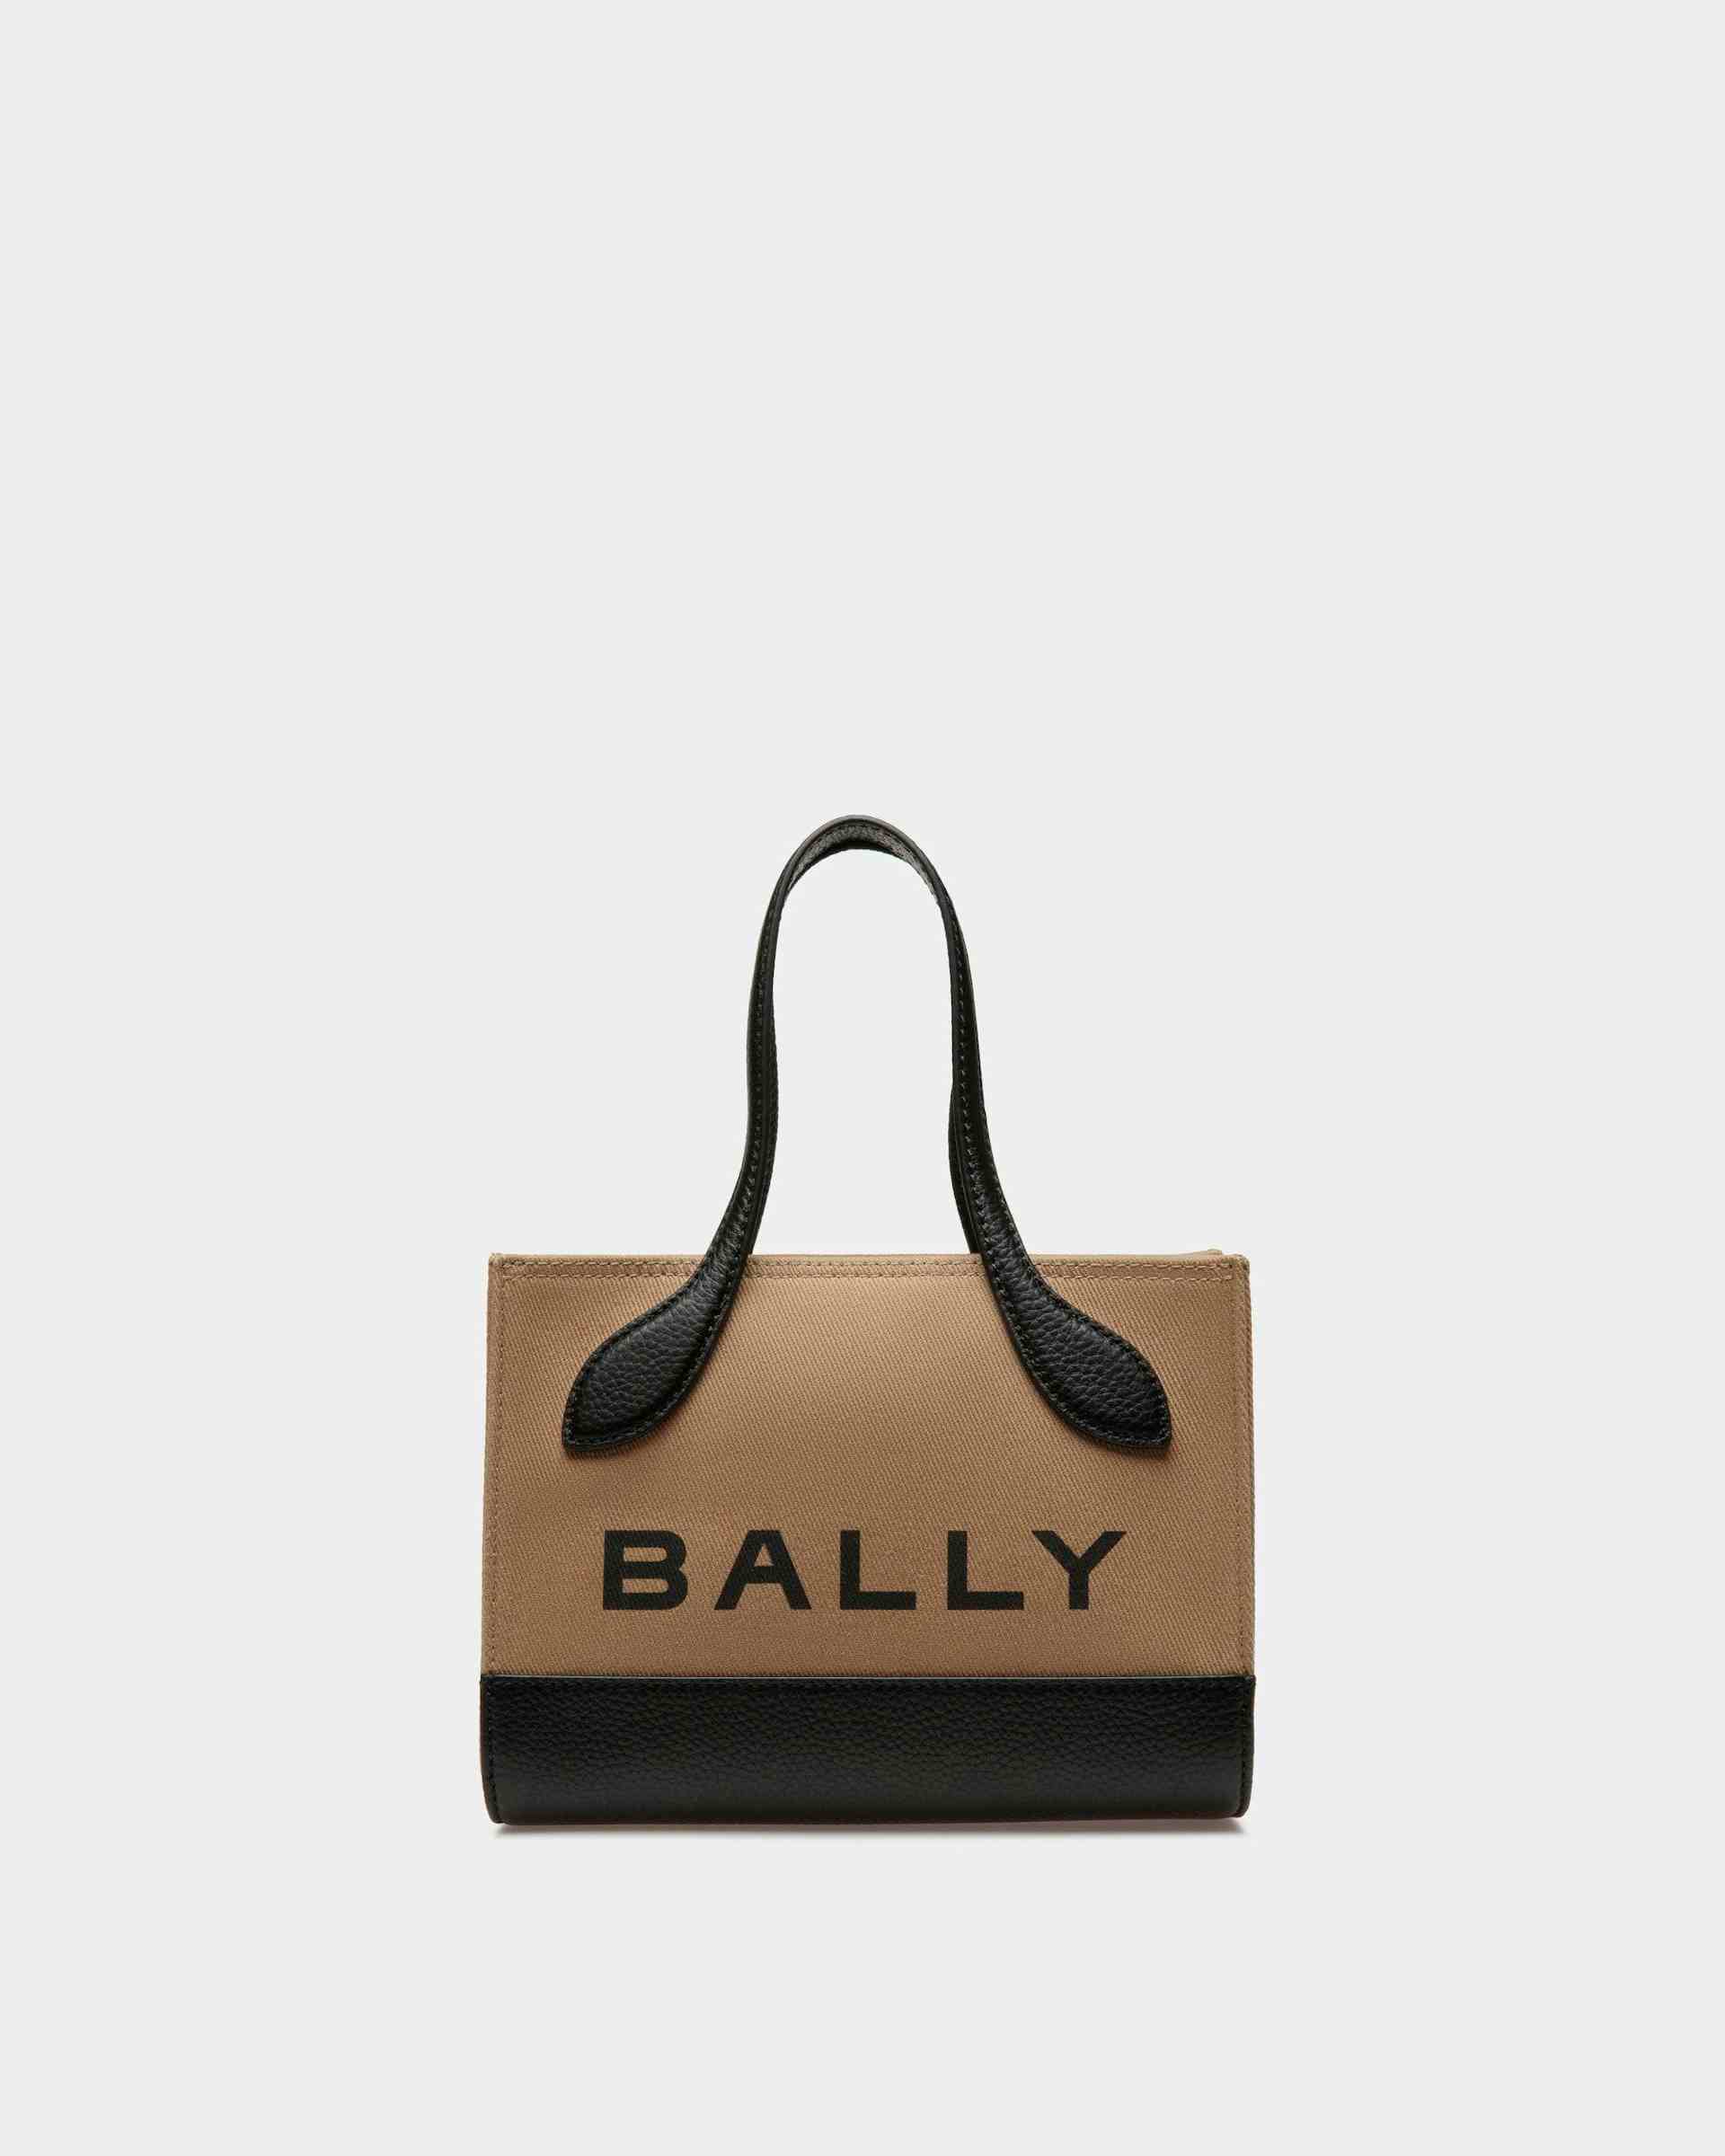 Bar Minibag In Sand And Black Fabric - Women's - Bally